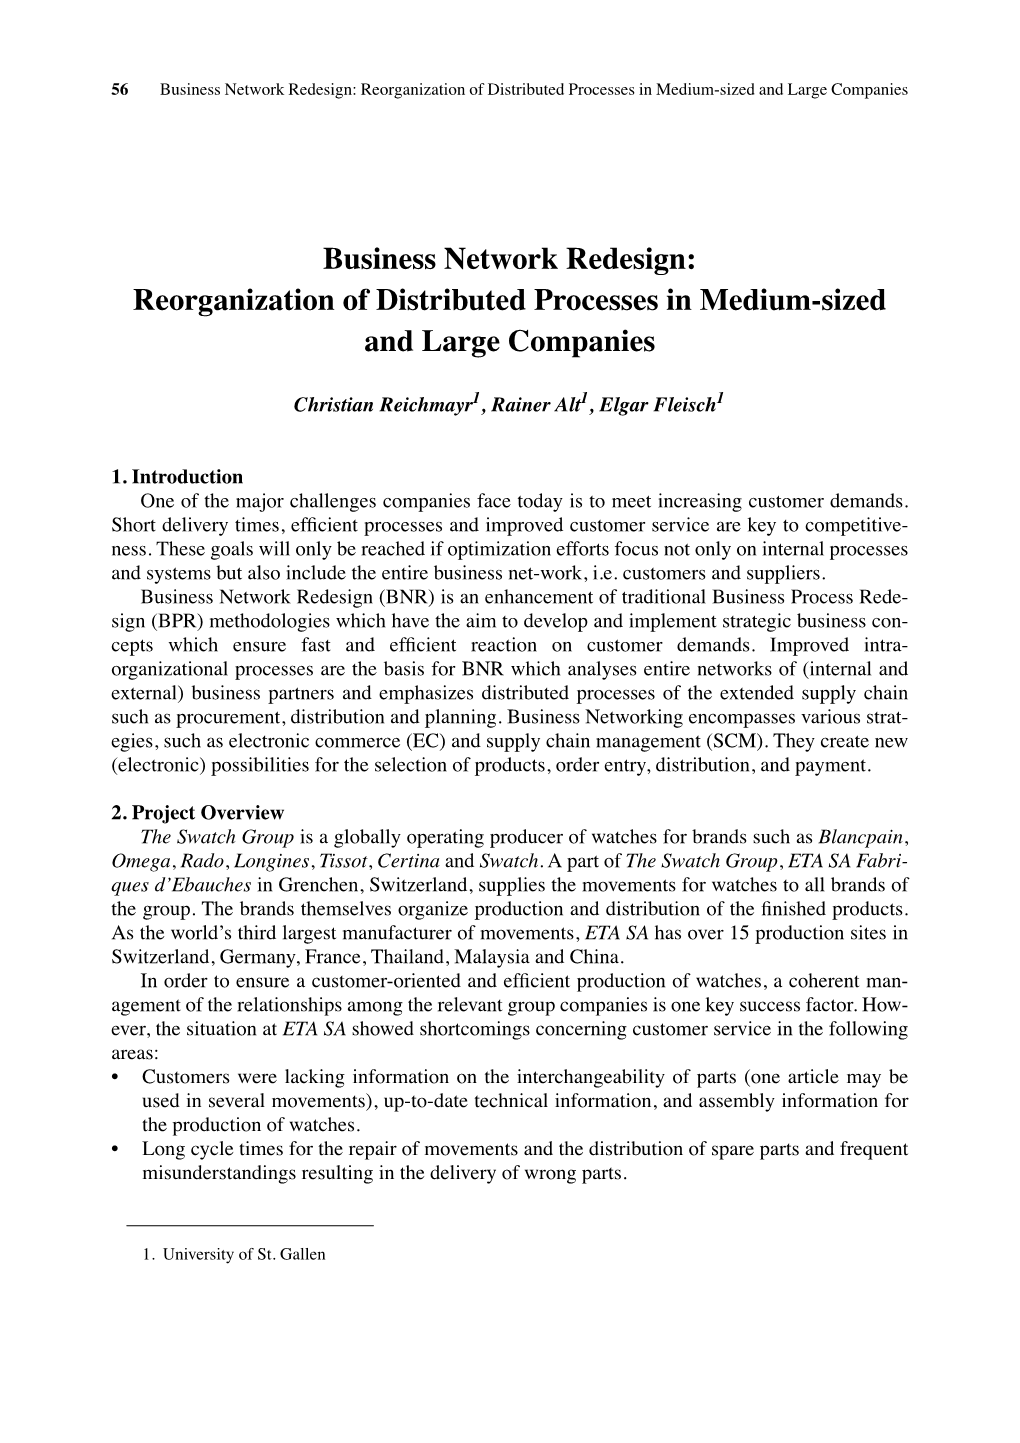 Business Network Redesign: Reorganization of Distributed Processes in Medium-Sized and Large Companies